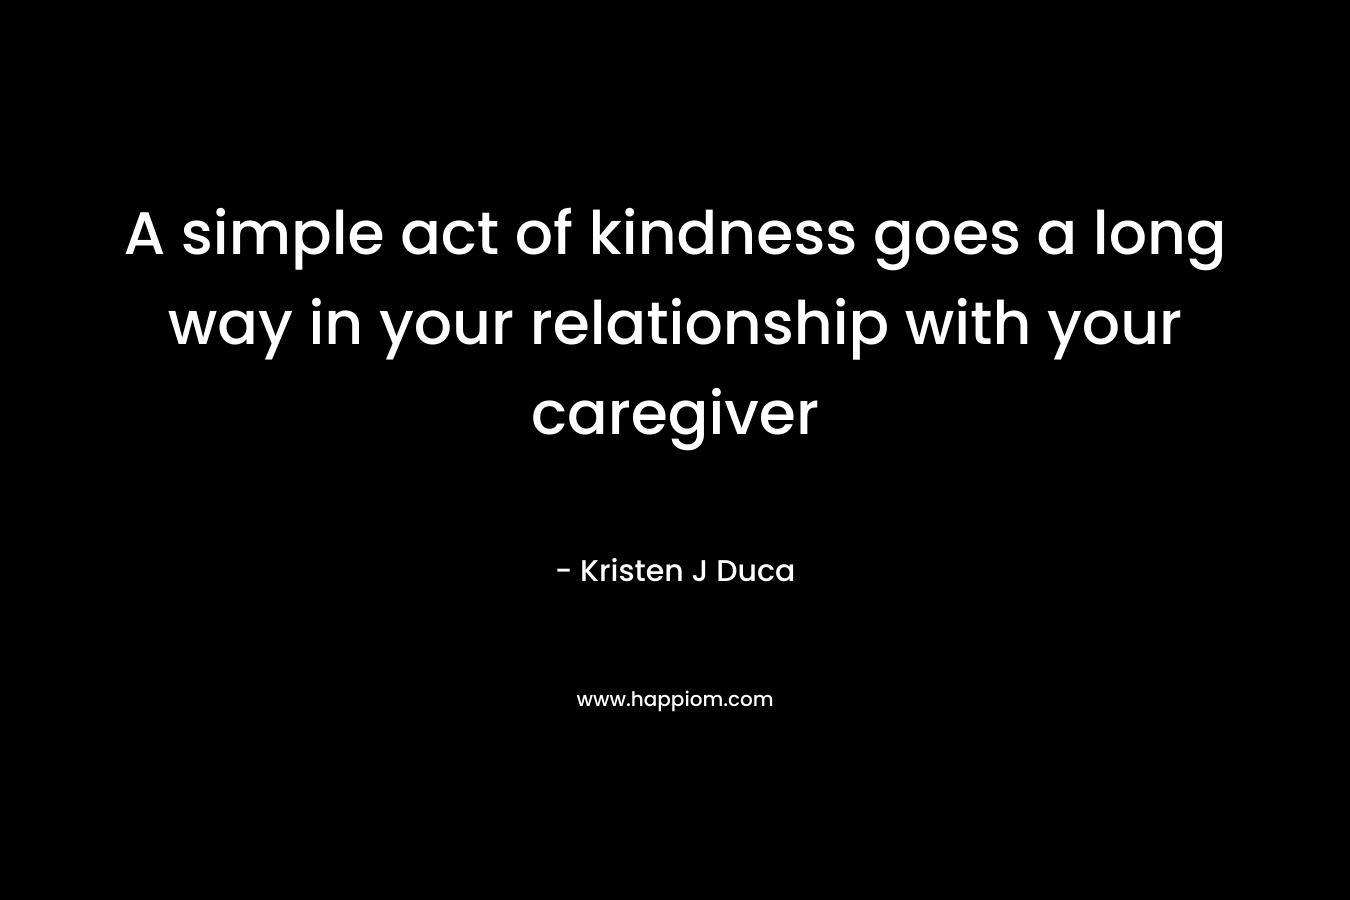 A simple act of kindness goes a long way in your relationship with your caregiver